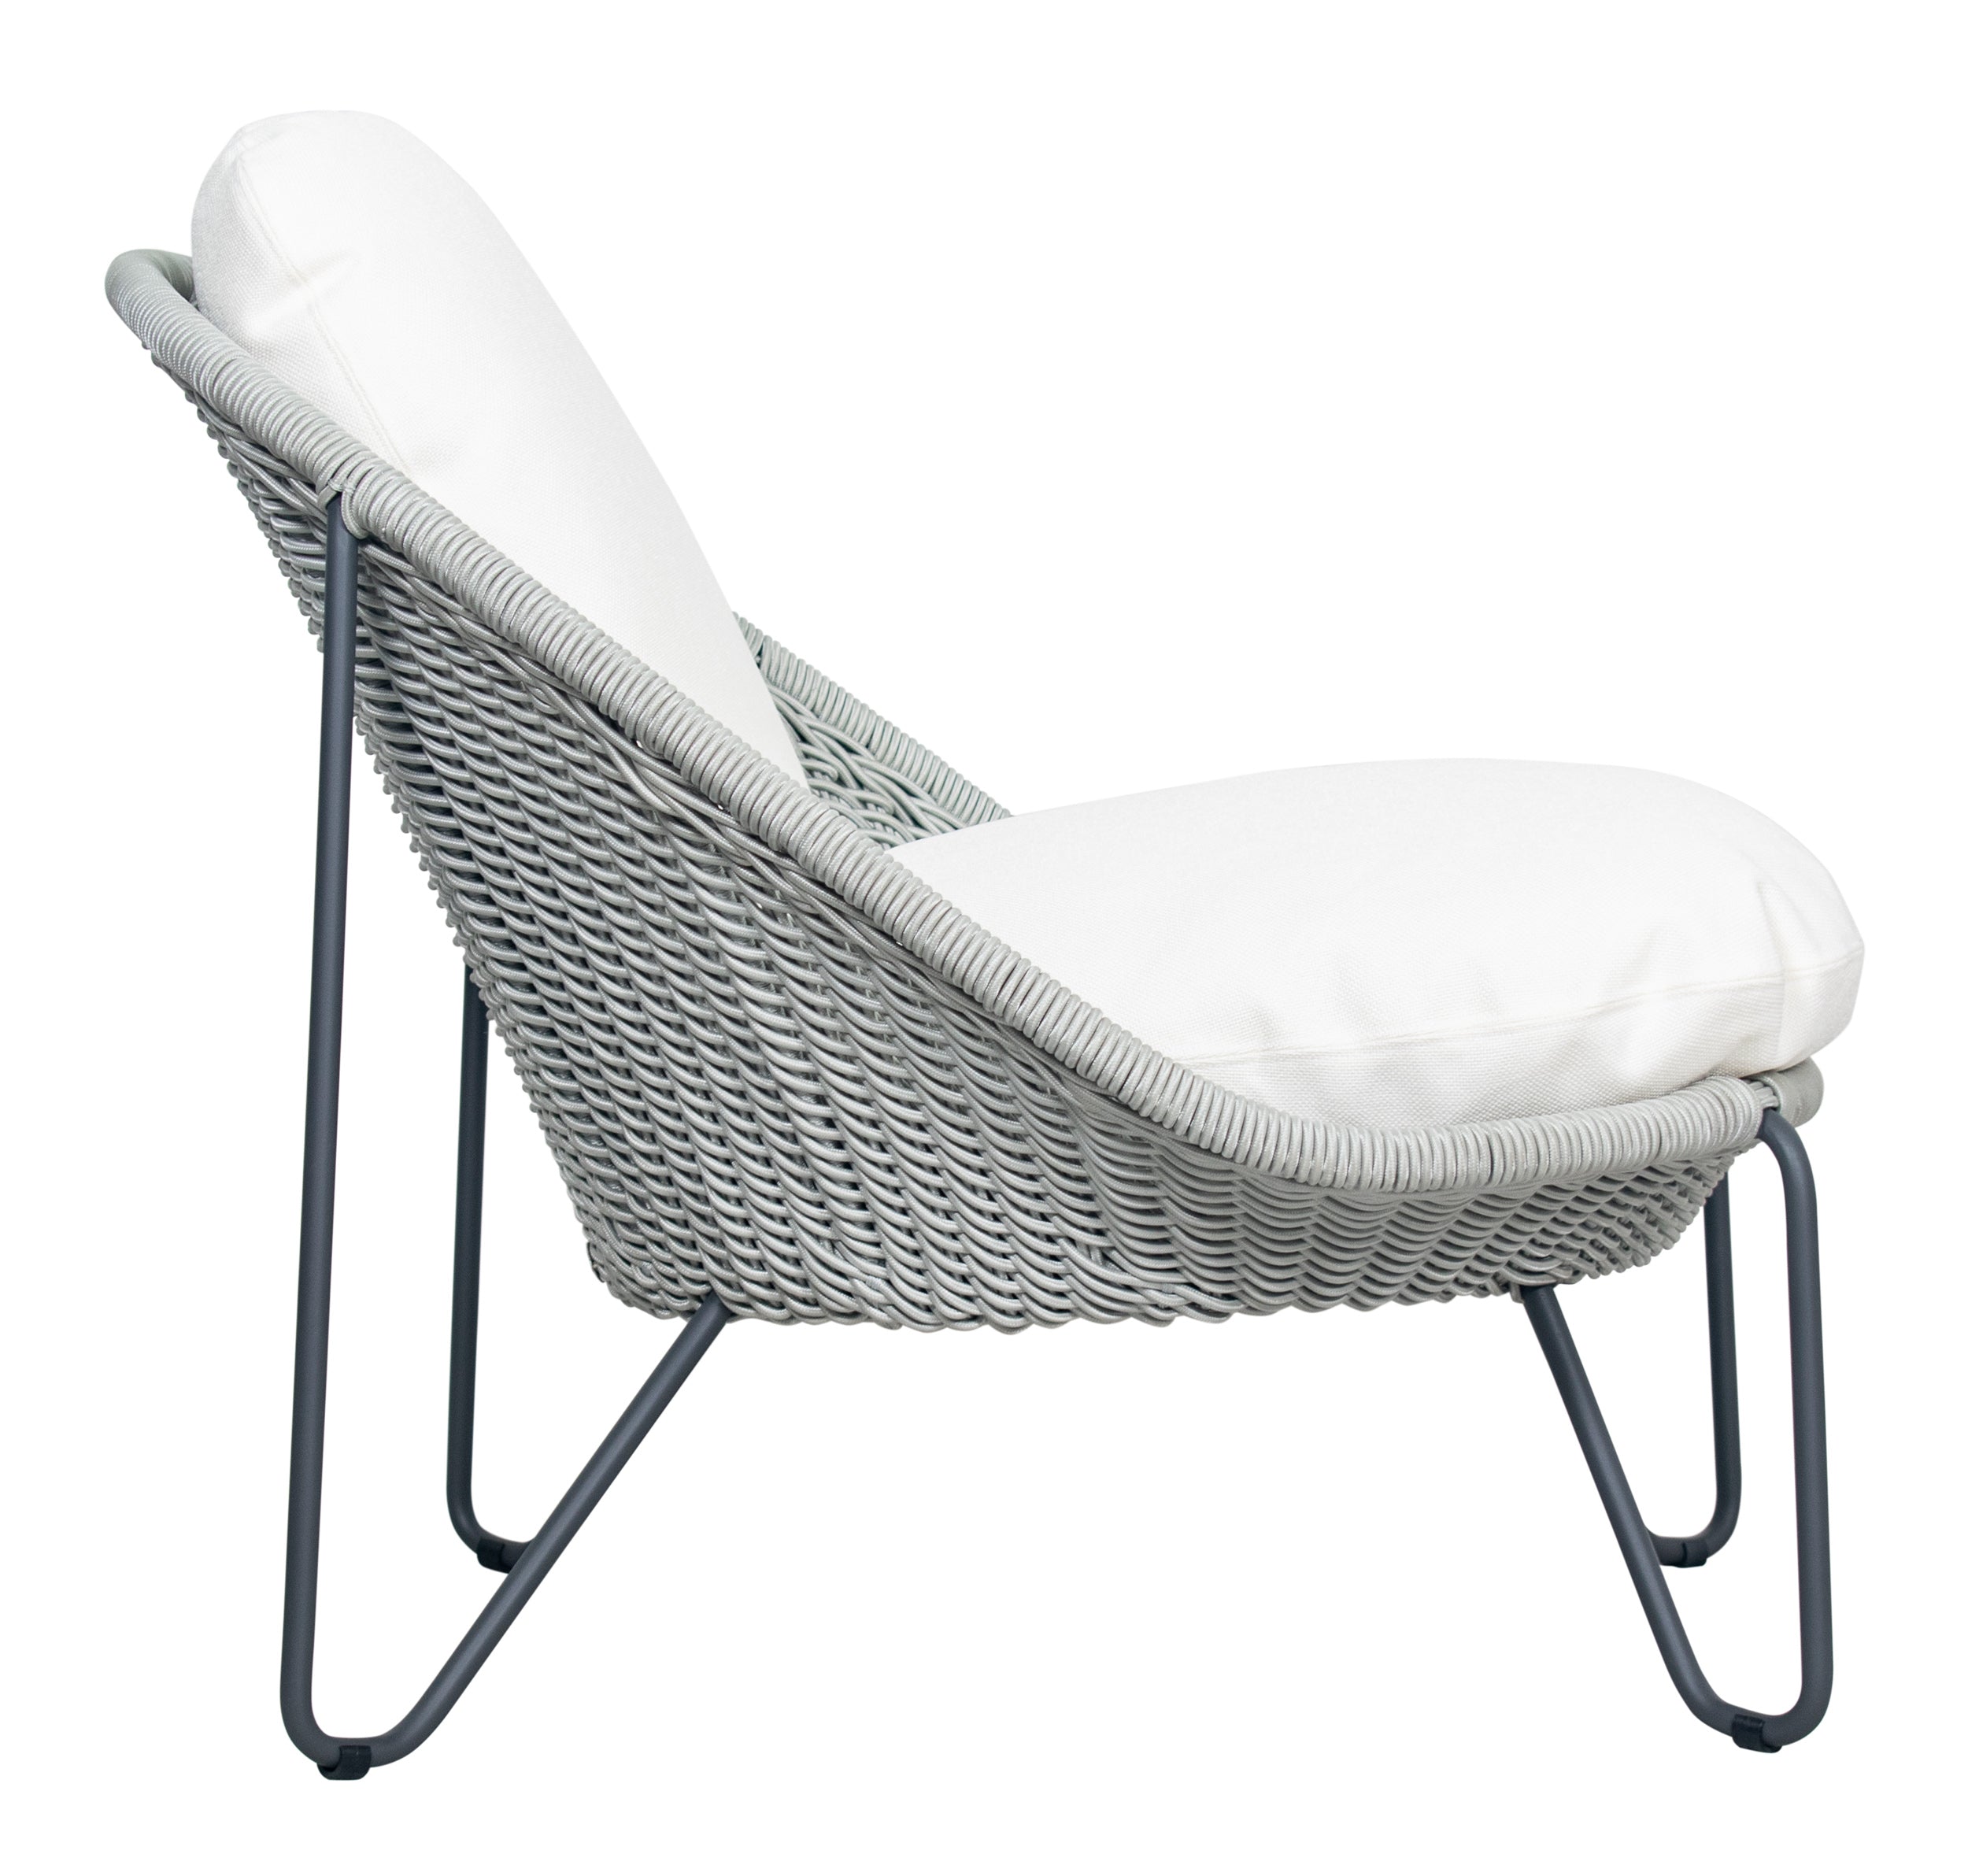 Azores Lounge Chair - Coconut White Outdoor Lounger Chair-Outdoor Lounge Chairs-Seasonal Living-LOOMLAN